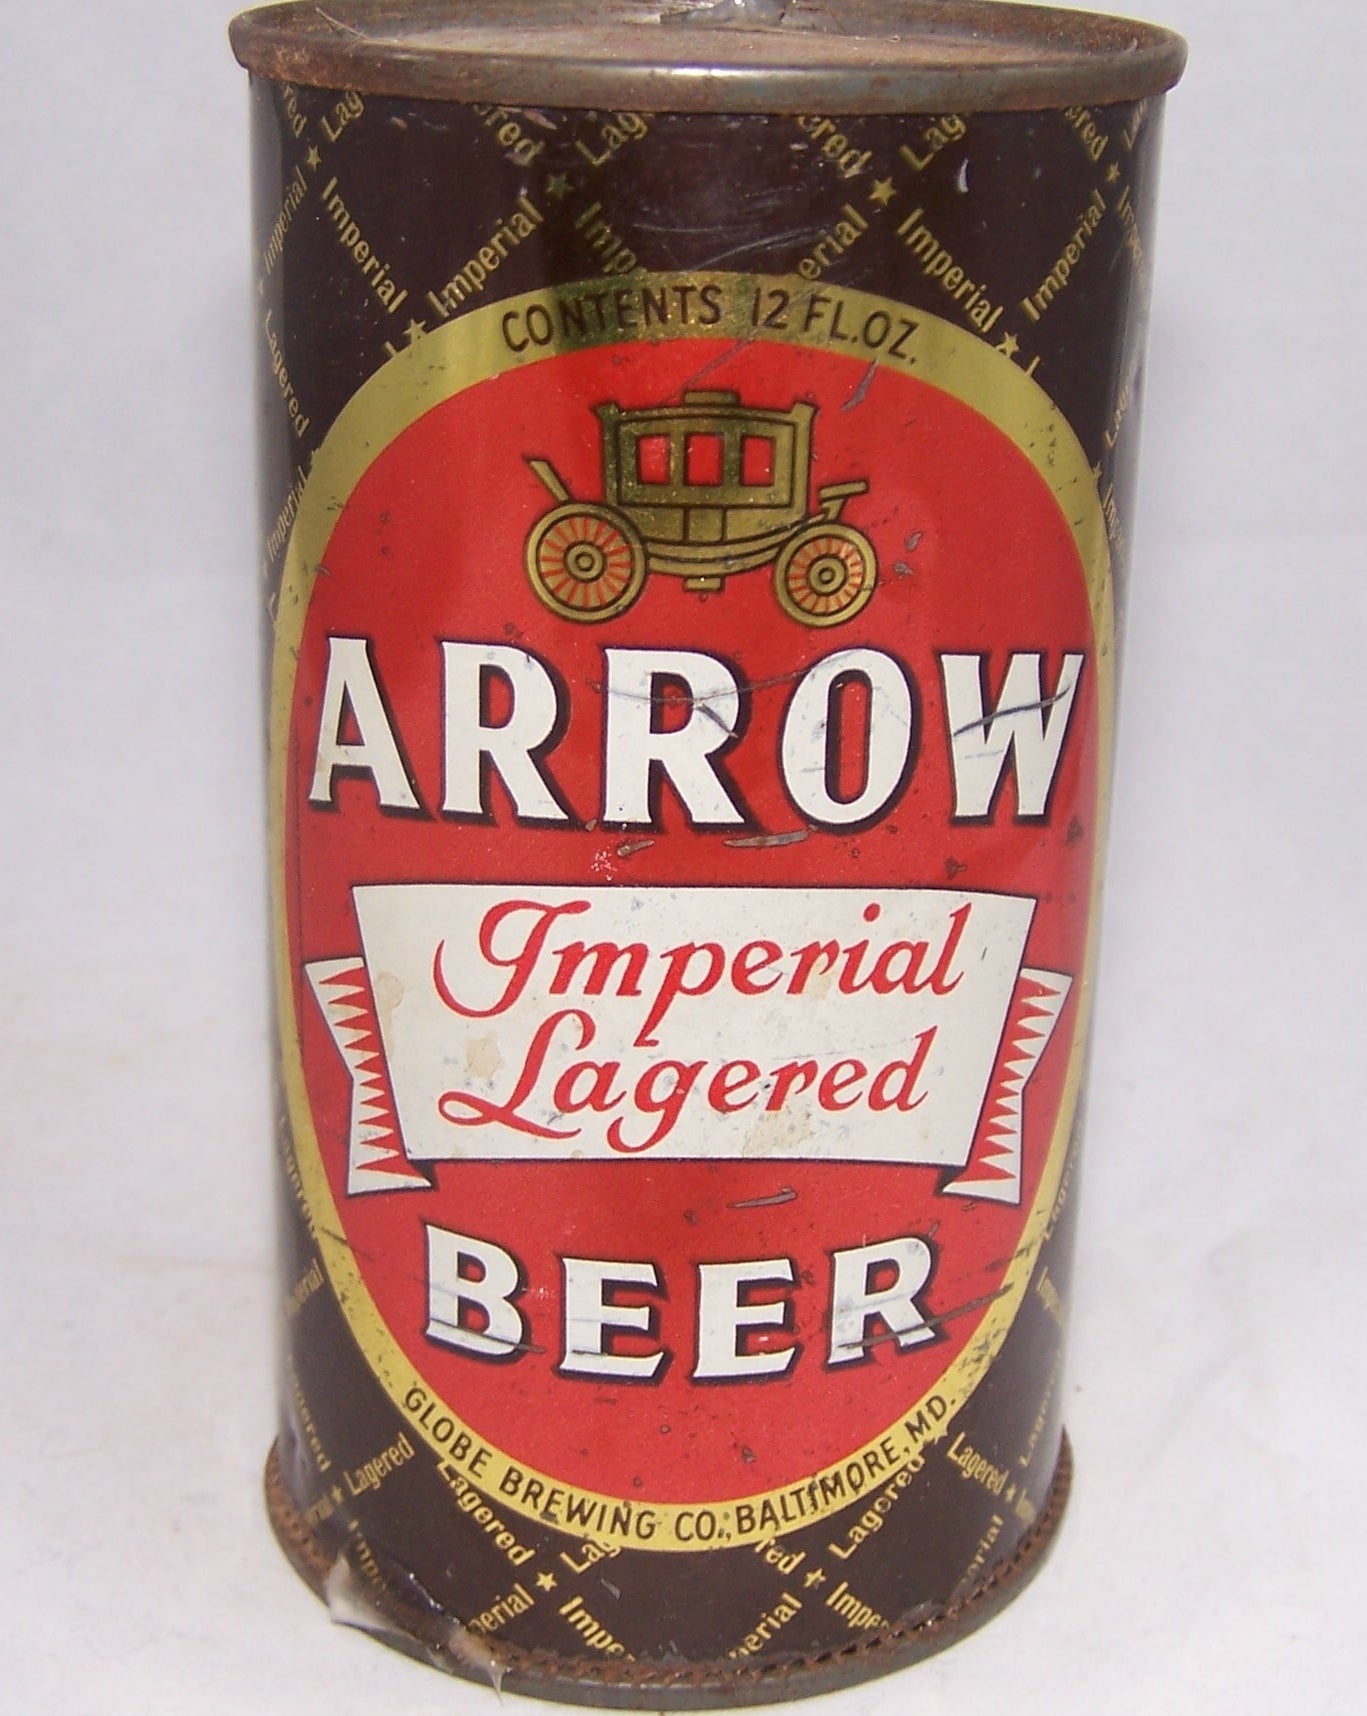 Arrow Imperial Lagered Beer, USBC 32-06, Grade 1- Sold on 09/01/17